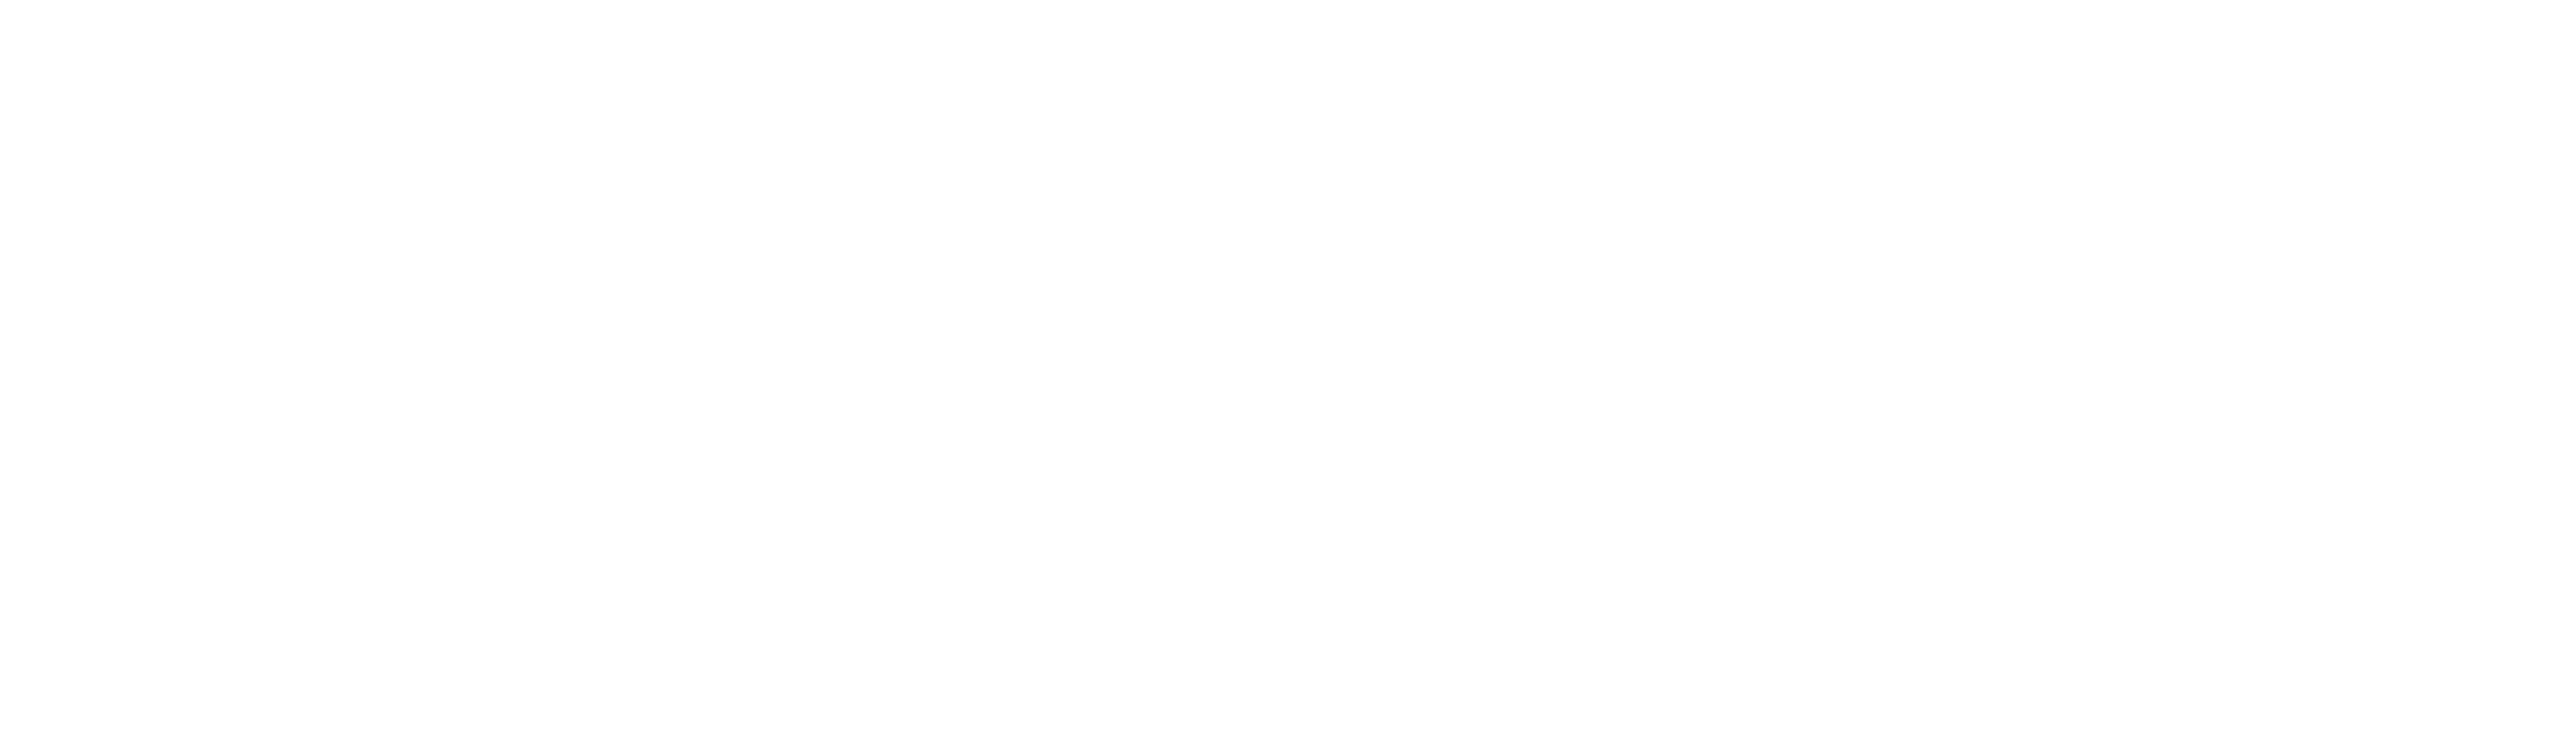 Vision 2022 Empowering Opportunities in white